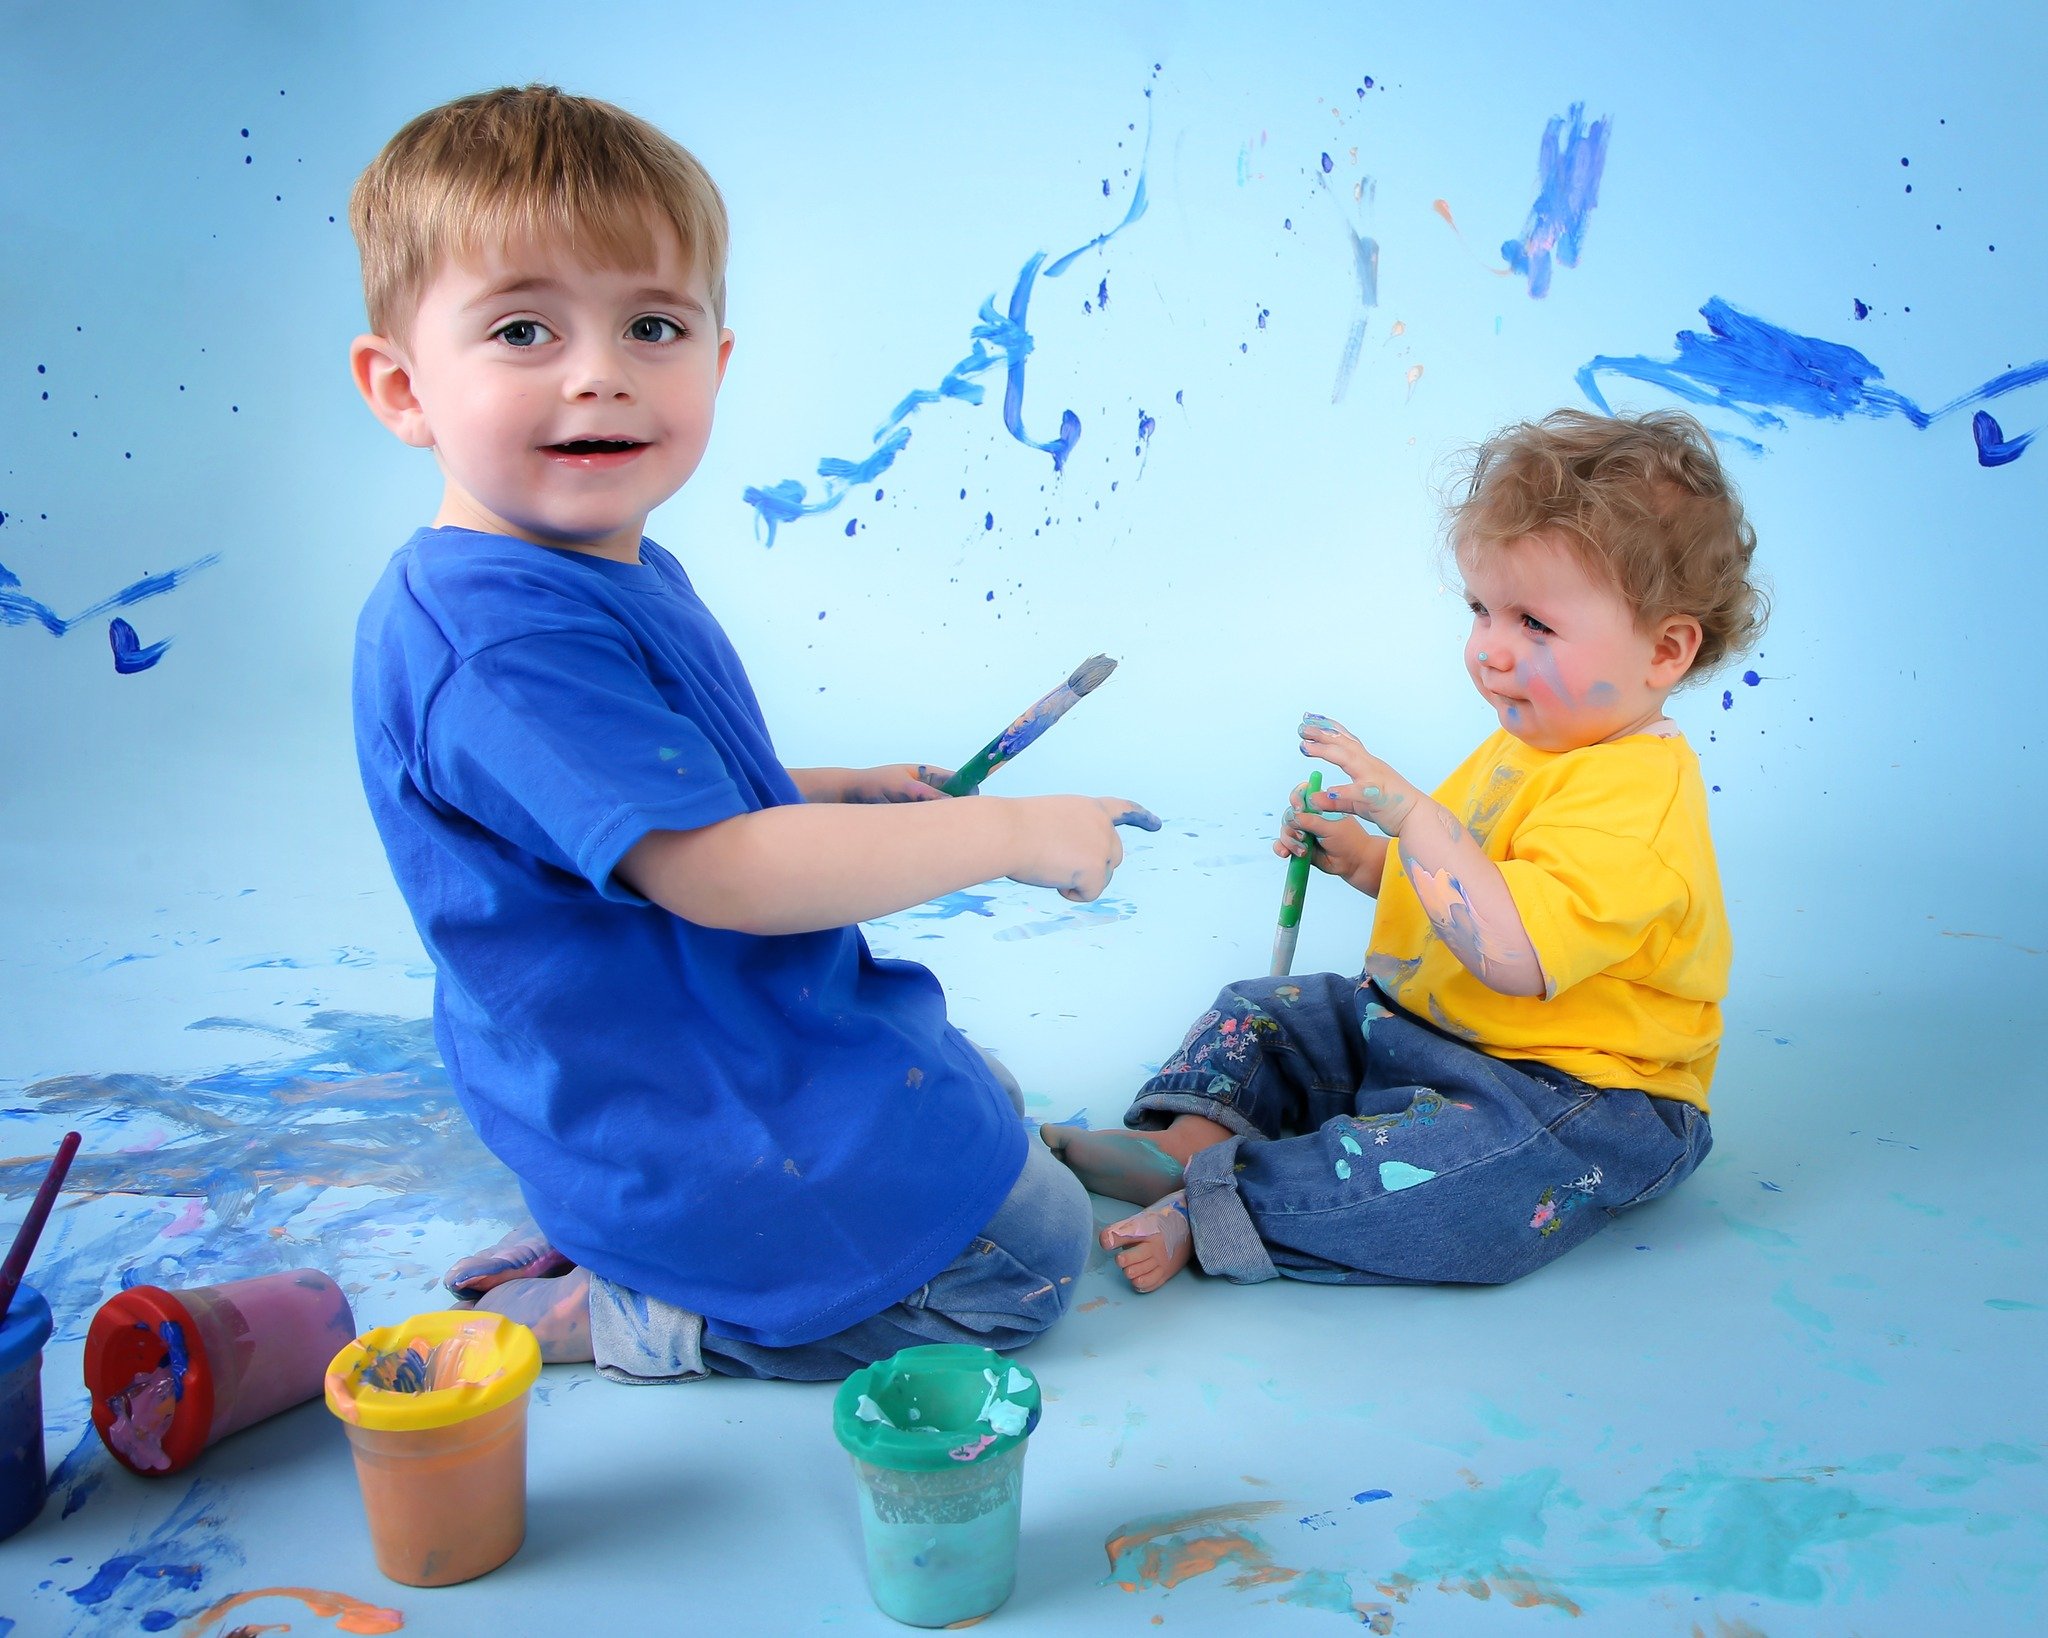 Do your kids like getting messy? Here is the one chance they can get to paint on the wall!

Photographed by Emily

#Zellig #indigbeth #paintsplash #birminghamphotographer #custardfactory